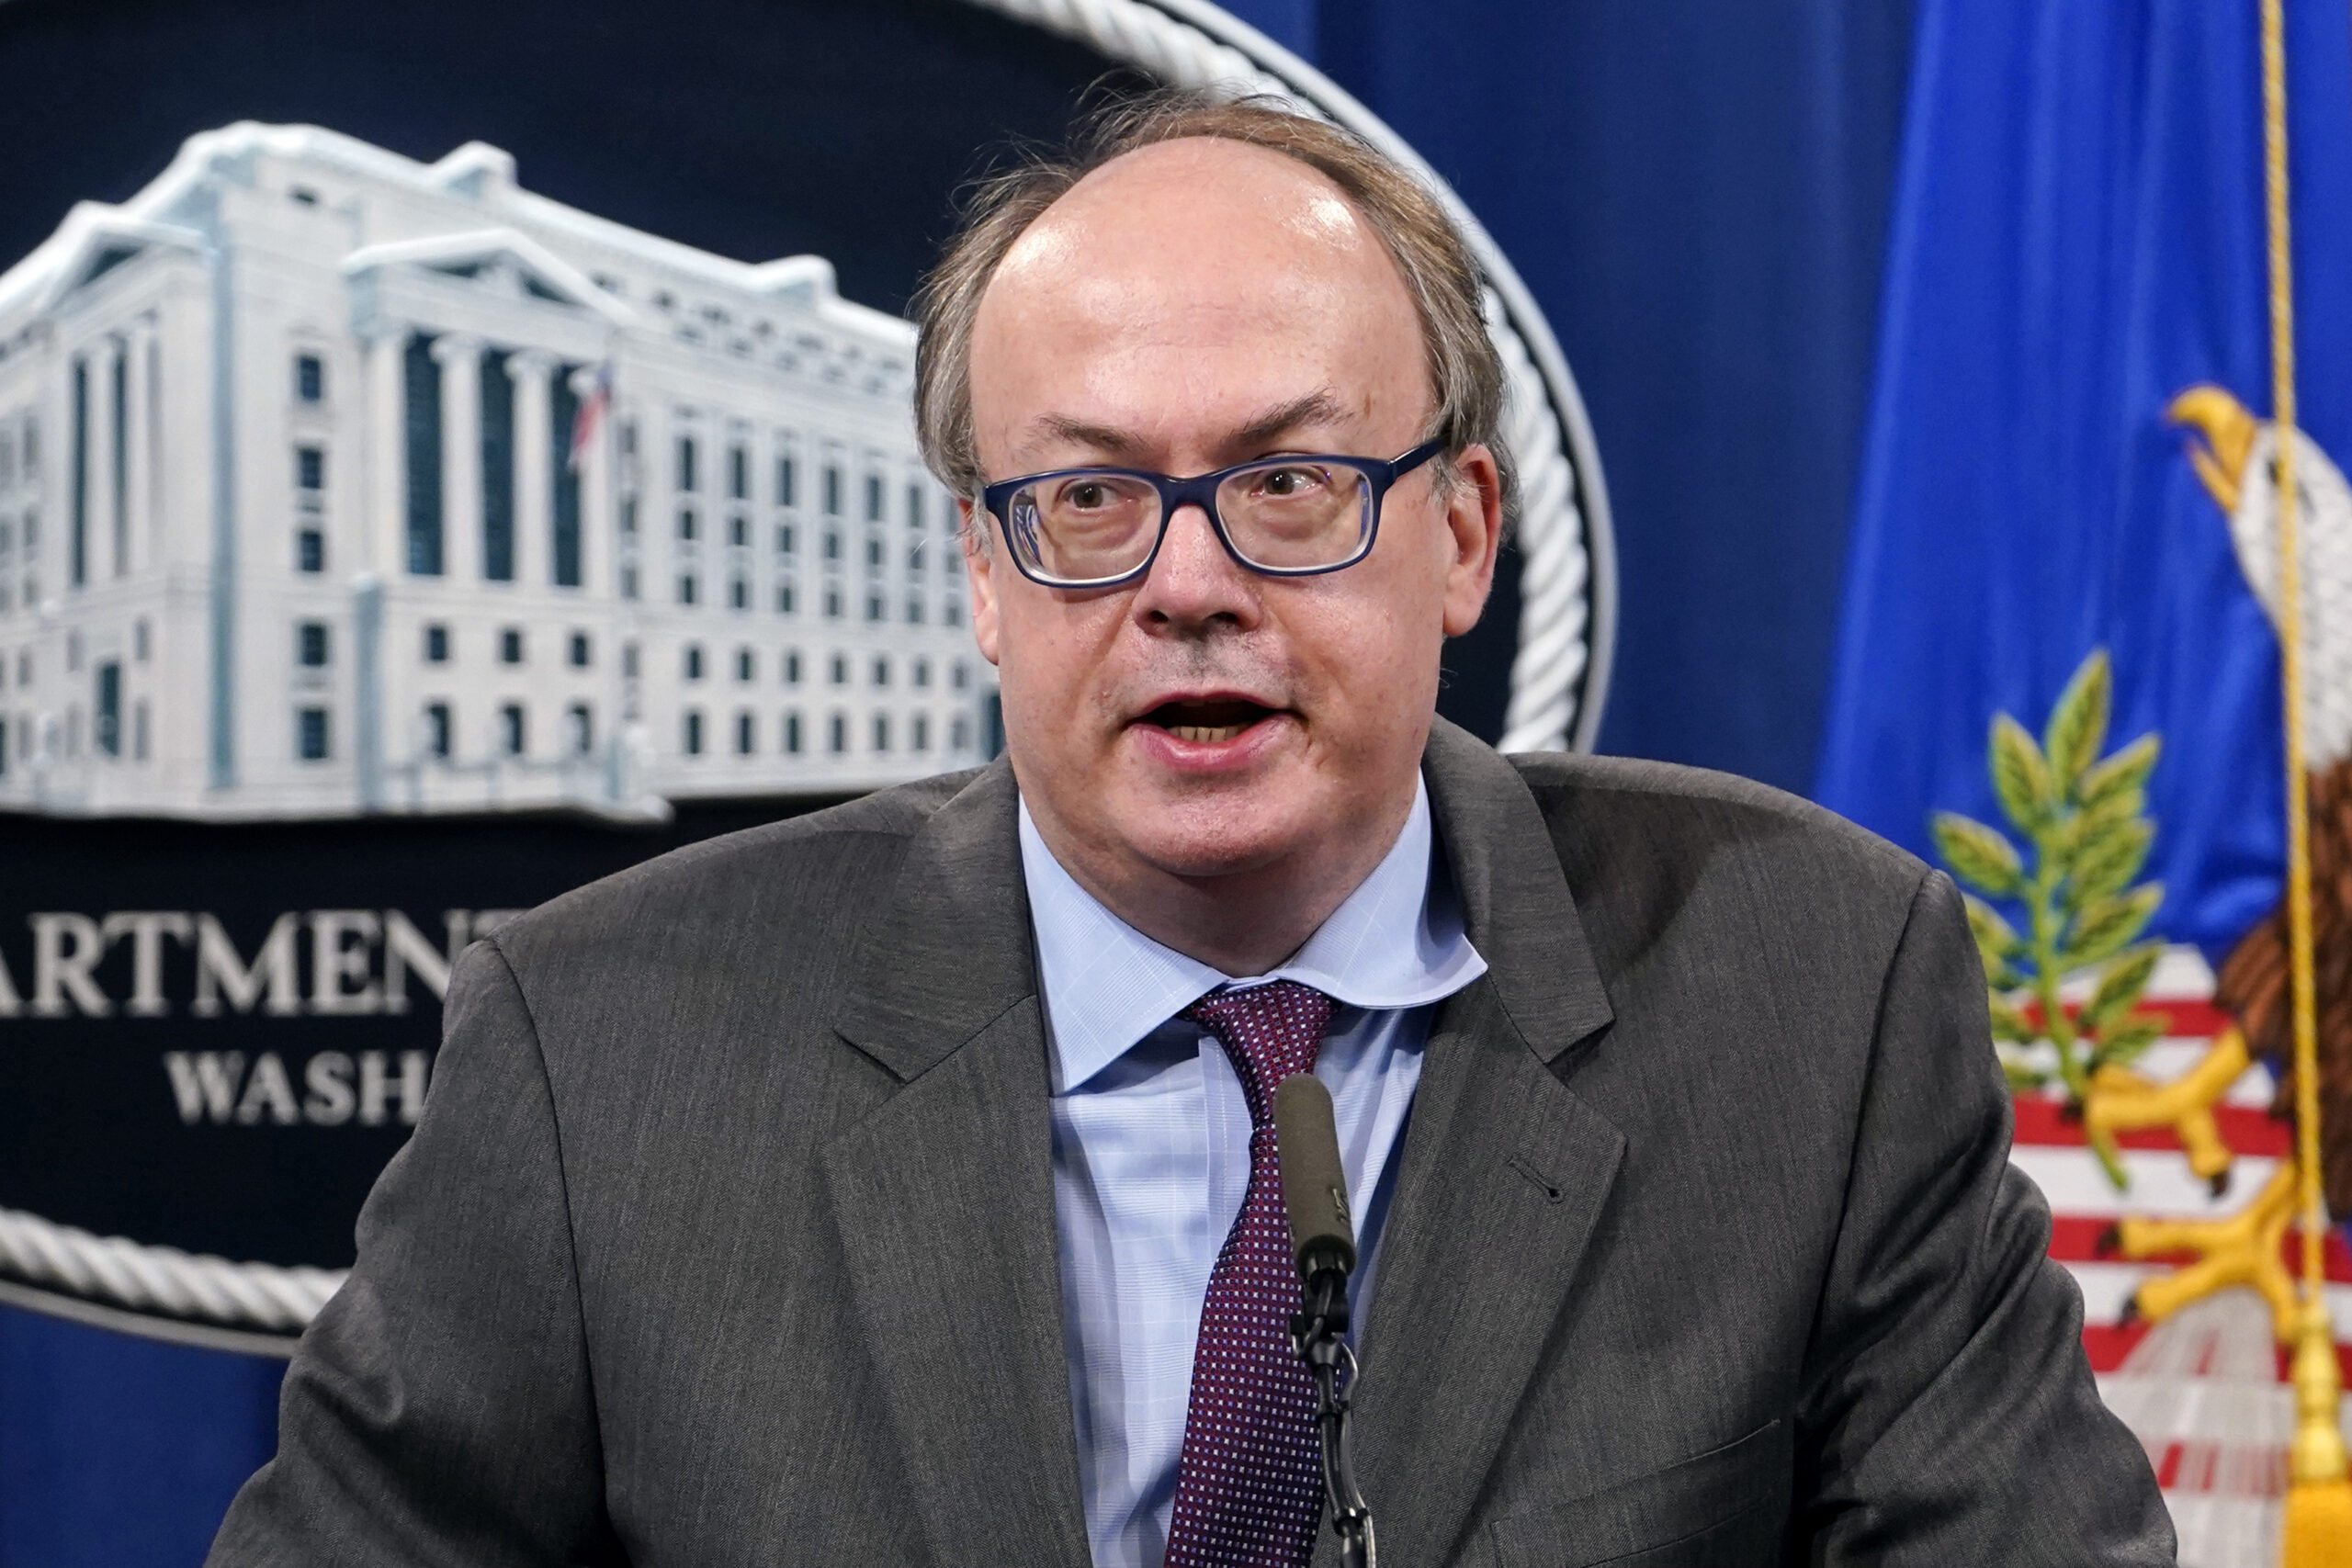 FILE - Jeffrey Clark, then-Assistant Attorney General for the Environment and Natural Resources Division, speaks during a news conference at the Justice Department in Washington, on Sept. 14, 2020. Federal agents have searched the Virginia home of the Trump-era Justice Department official who championed efforts by President Donald Trump to overturn the results of the 2020 election. (AP Photo/Susan Walsh, Pool, File)